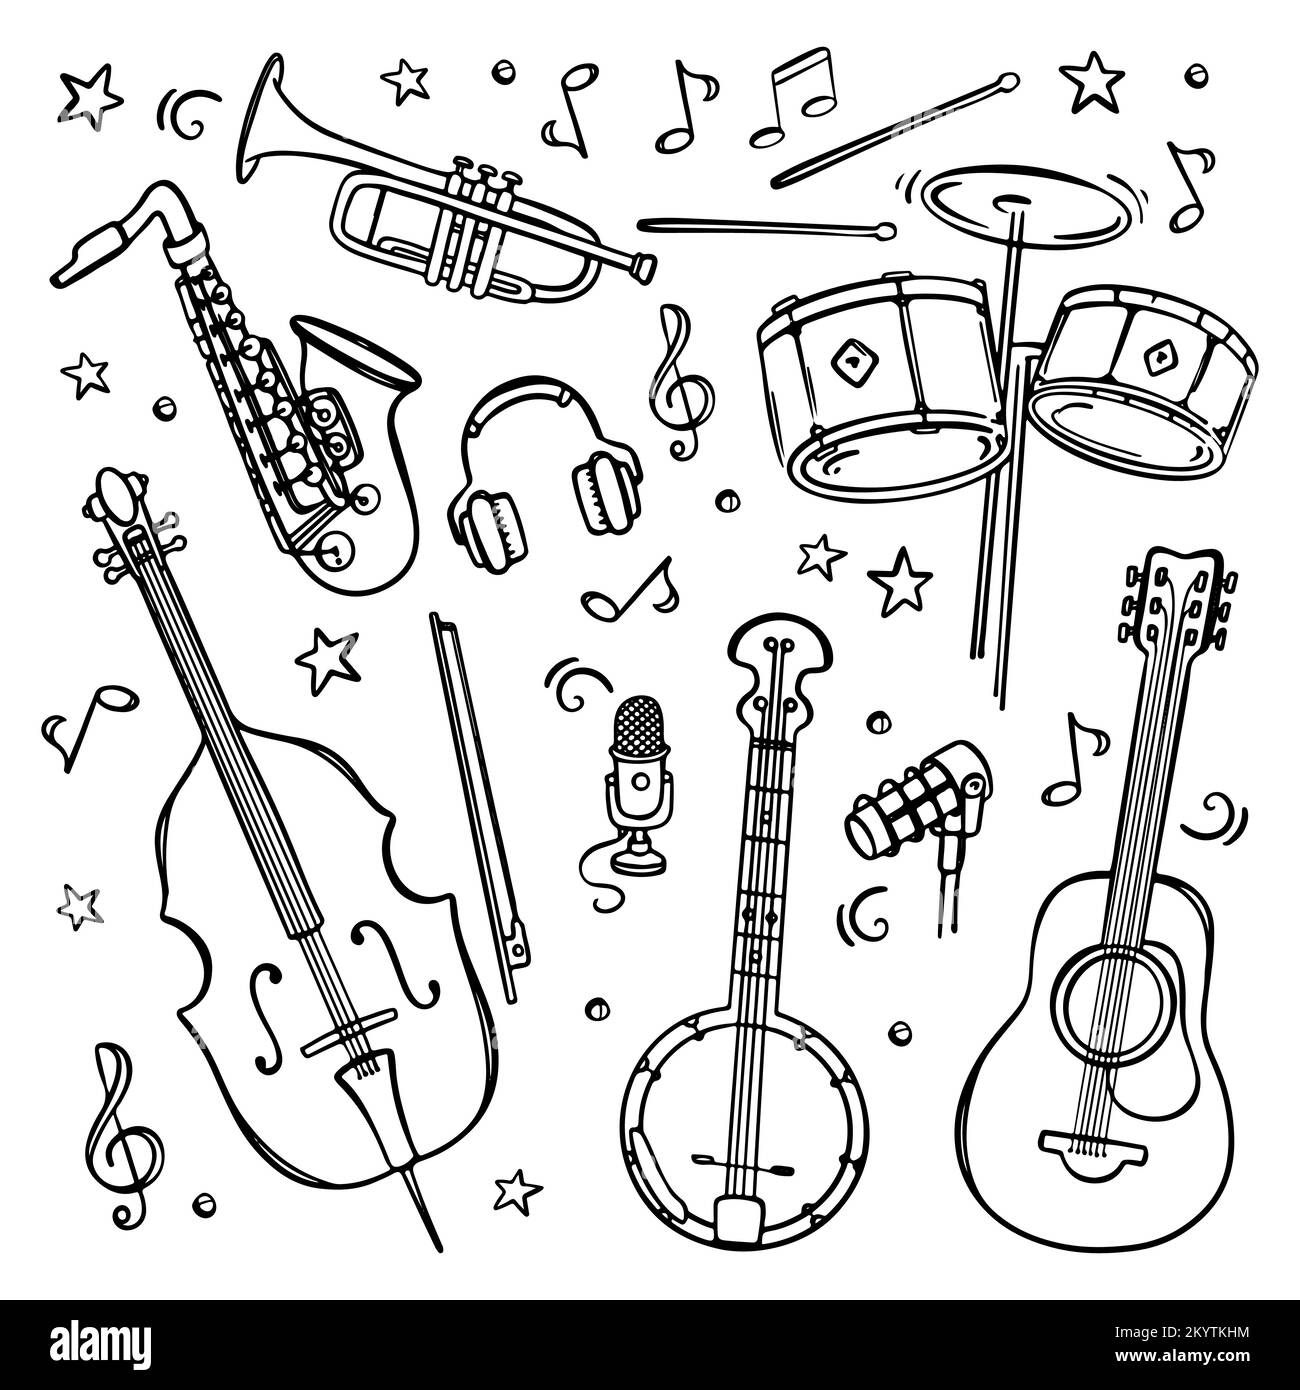 MUSICAL INSTRUMENTS Large Design Collection For Concerts And Recording Studios Notes Treble Clef Microphones And Headphones Monochrome Hand Drawn Vect Stock Vector